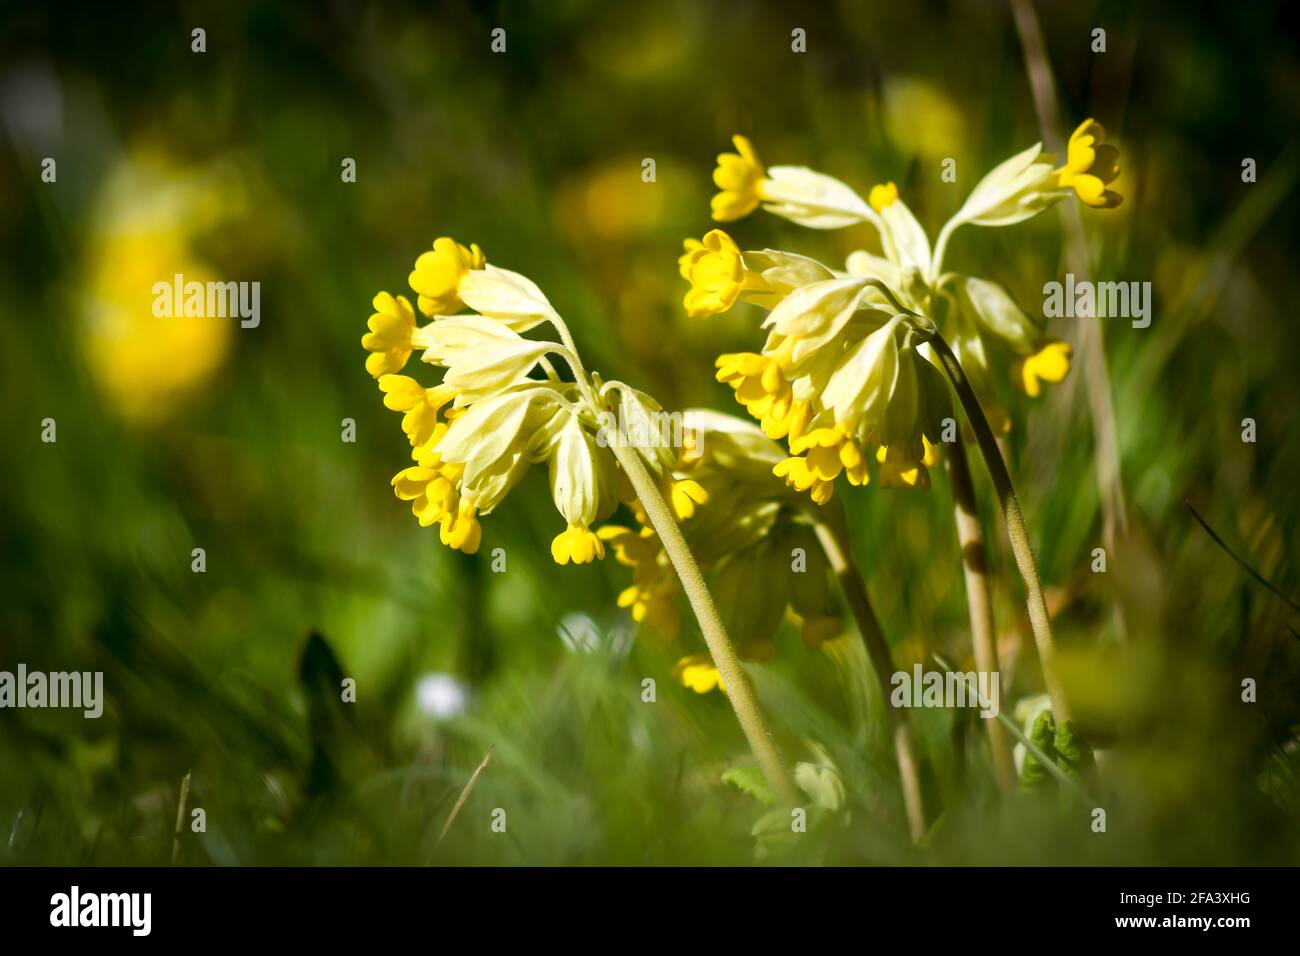 cowslip on flower Stock Photo